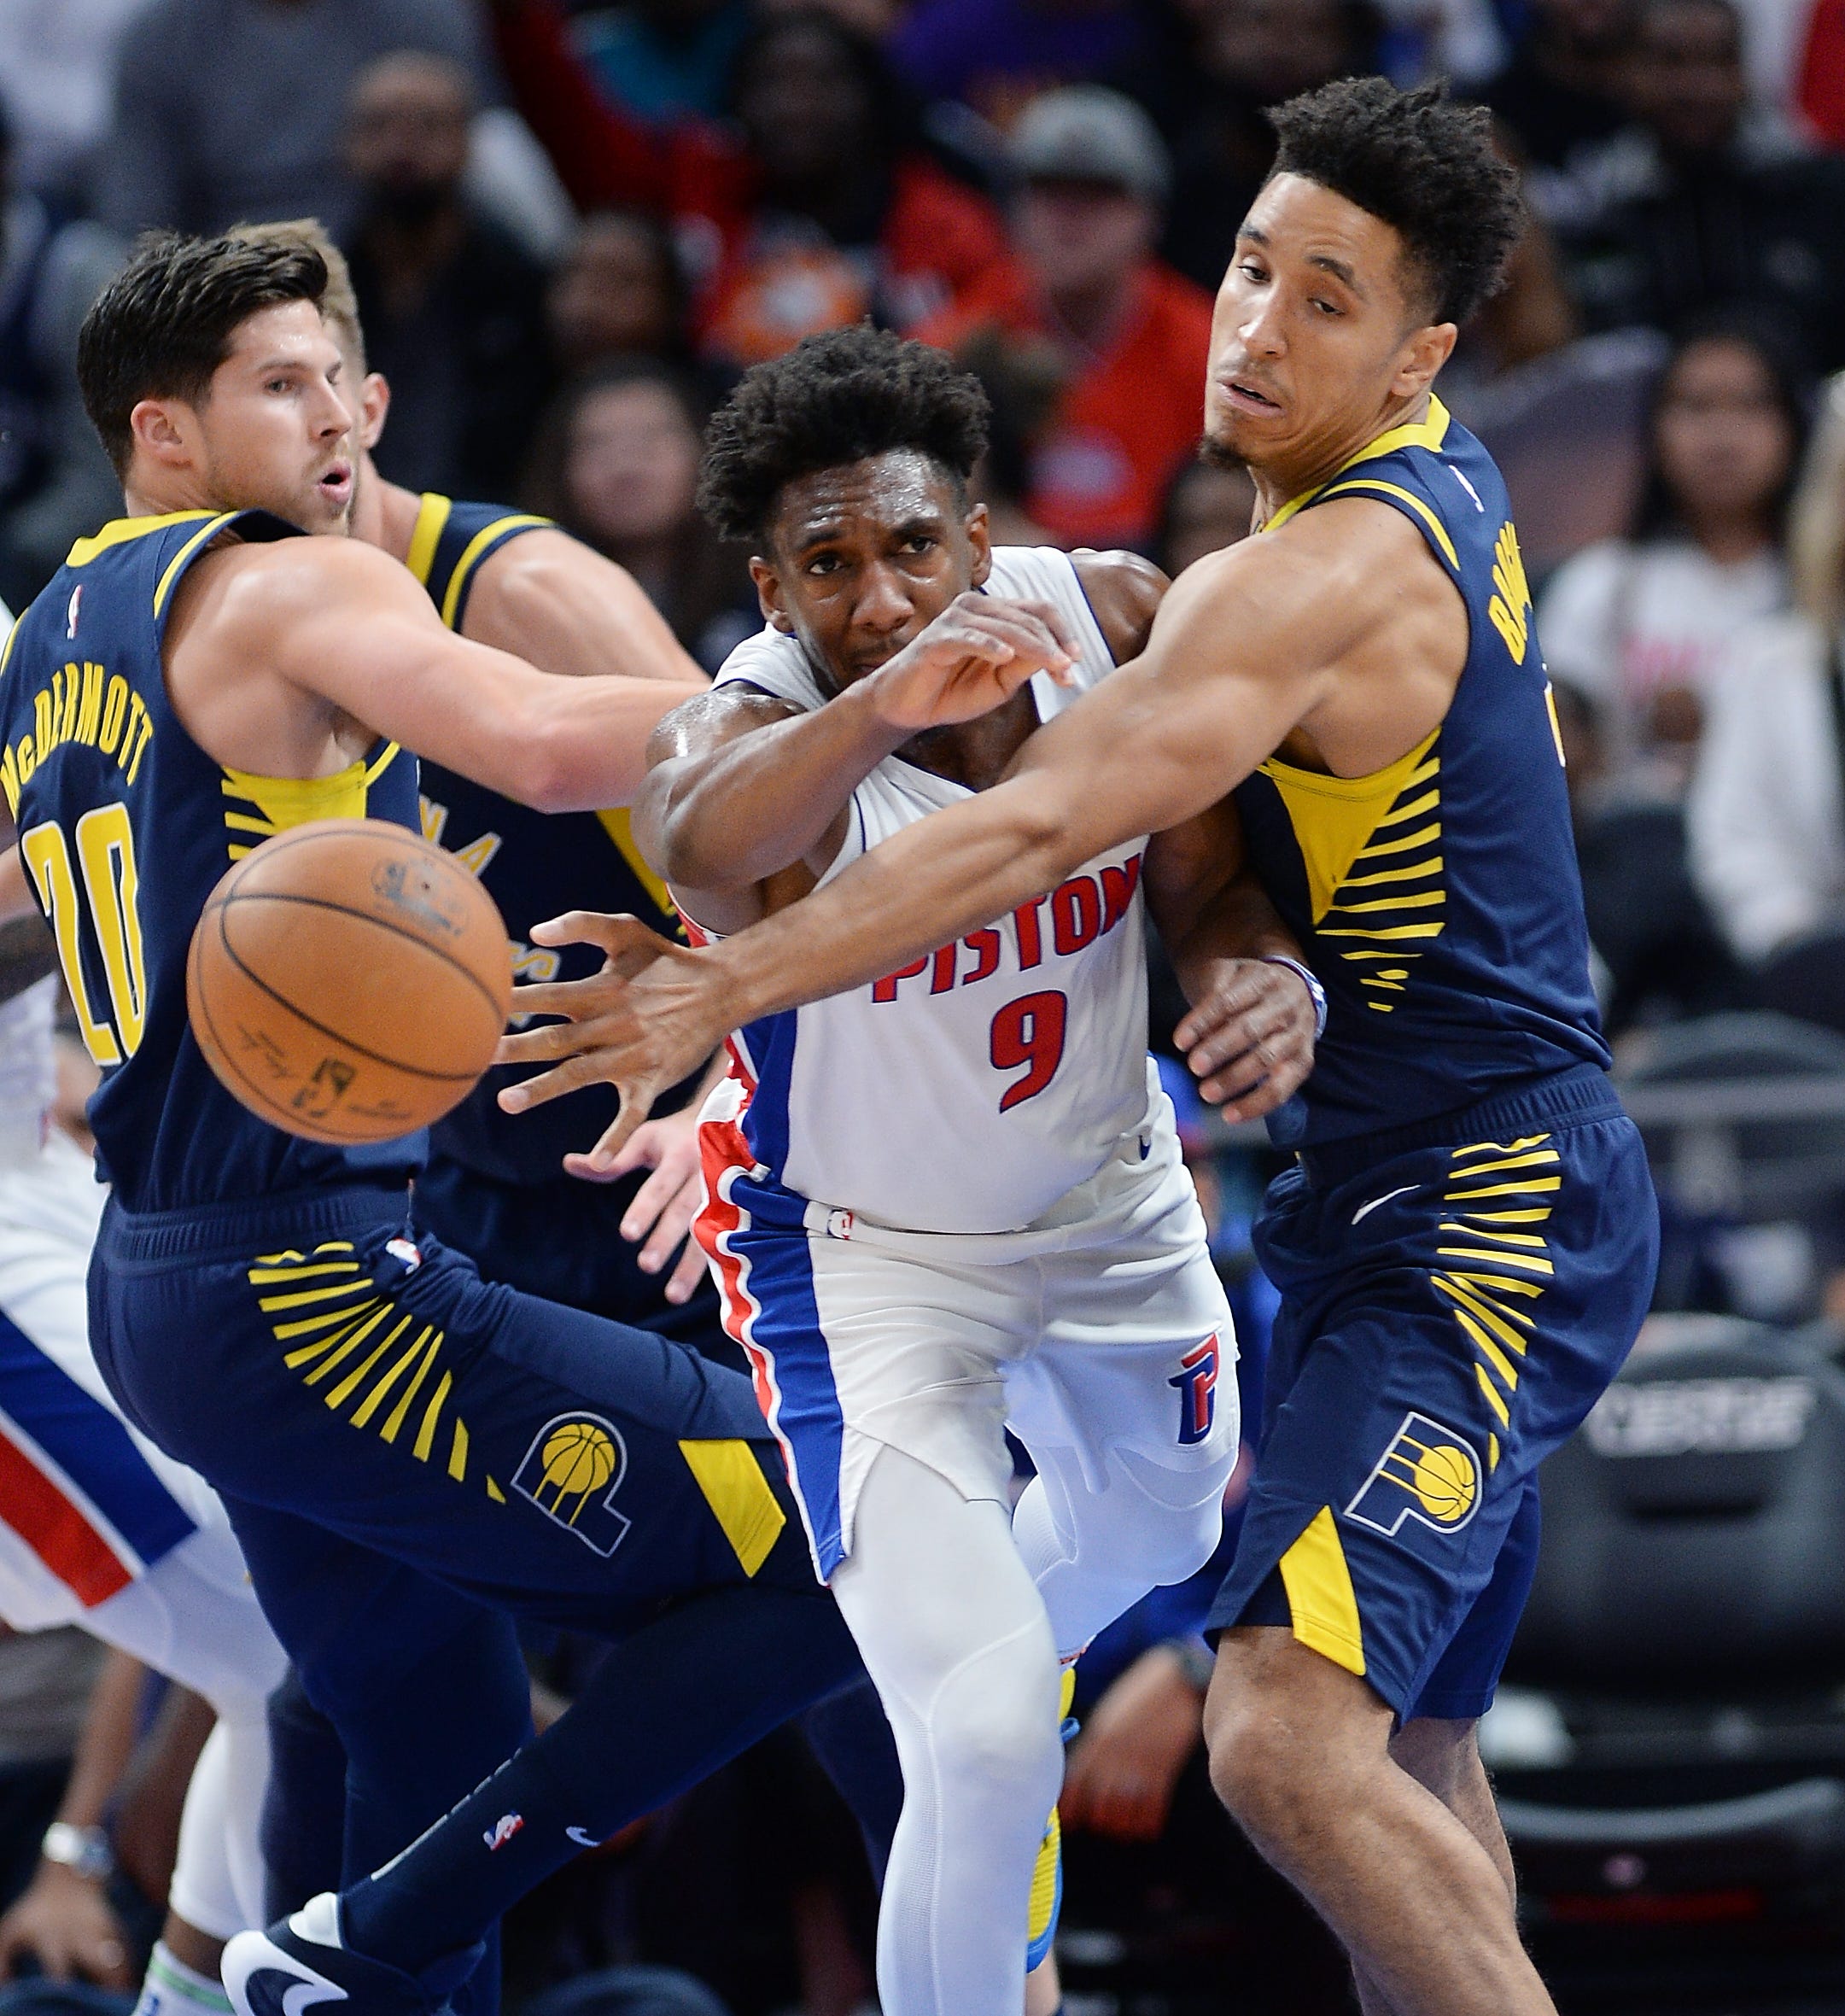 Pistons' Langston Galloway, (9), and Pacers' Malcolm Brogdon fight for a loose ball in the fourth quarter.